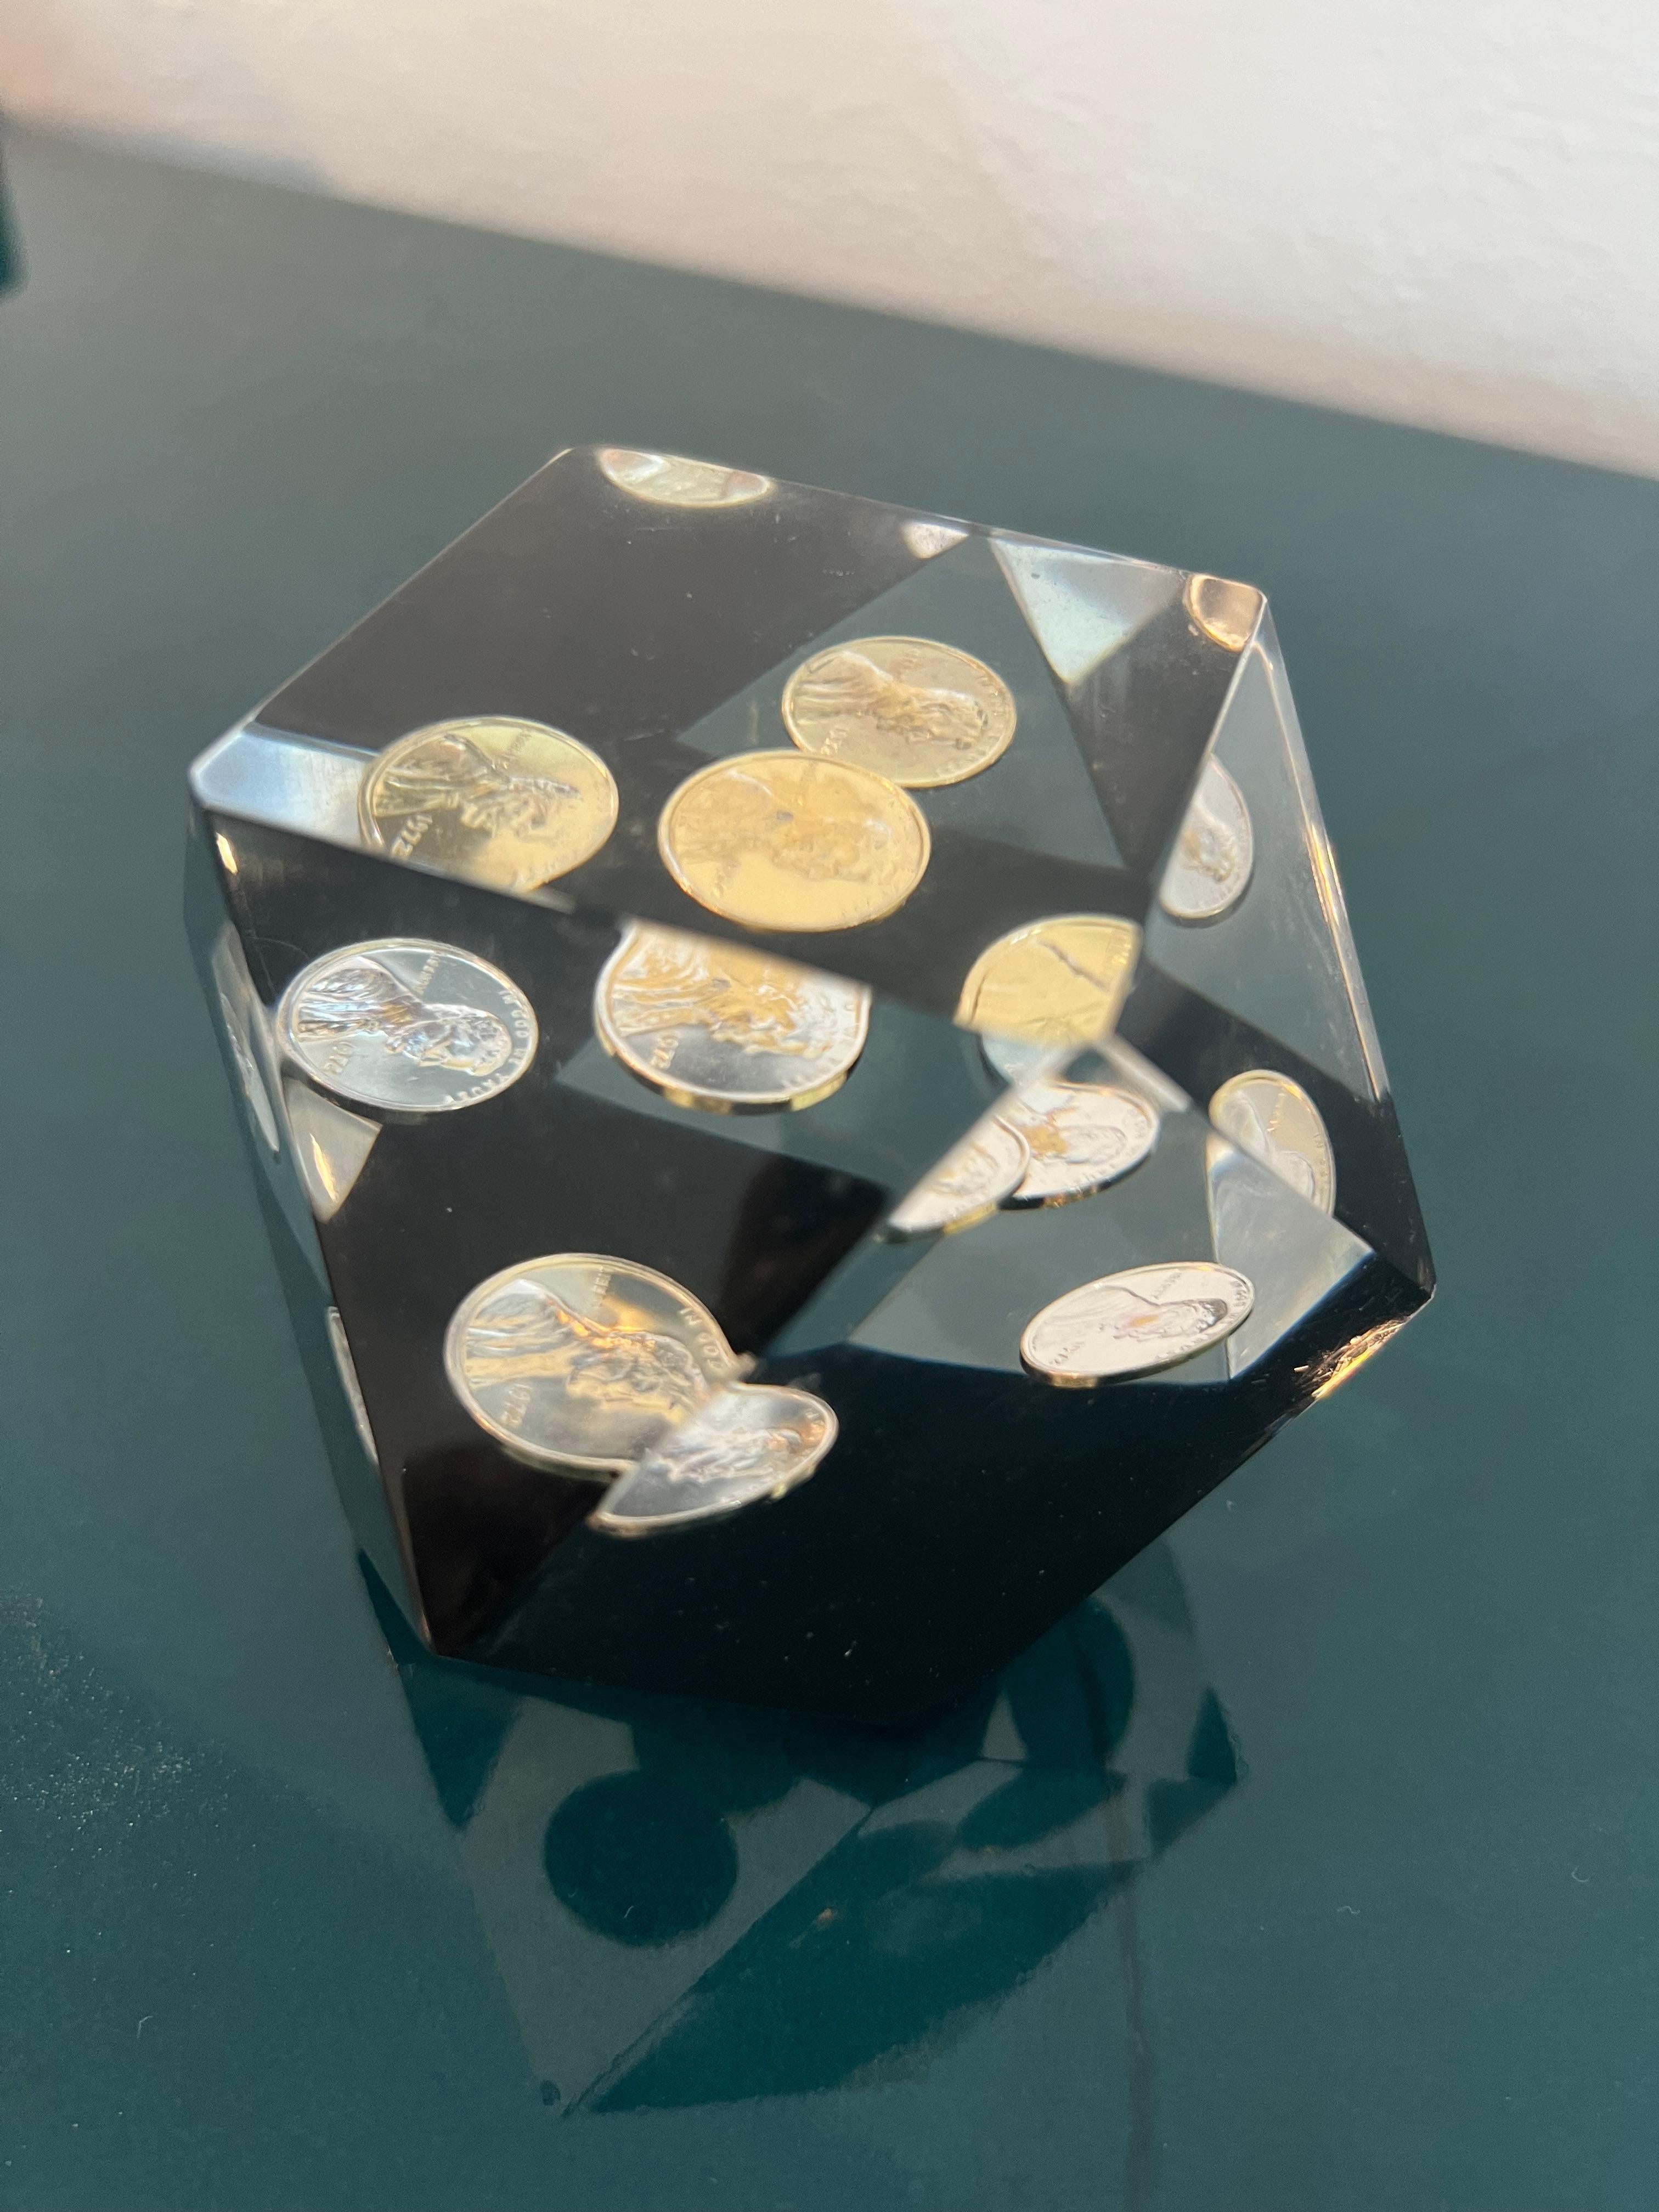 Floating penny geometric lucite paperweight. Consisting entirely of 1972 pennies. Scratches and scuffs found throughout, consistent with age and use. Please refer to photos.

Would work well in a variety of interiors such as modern, mid century